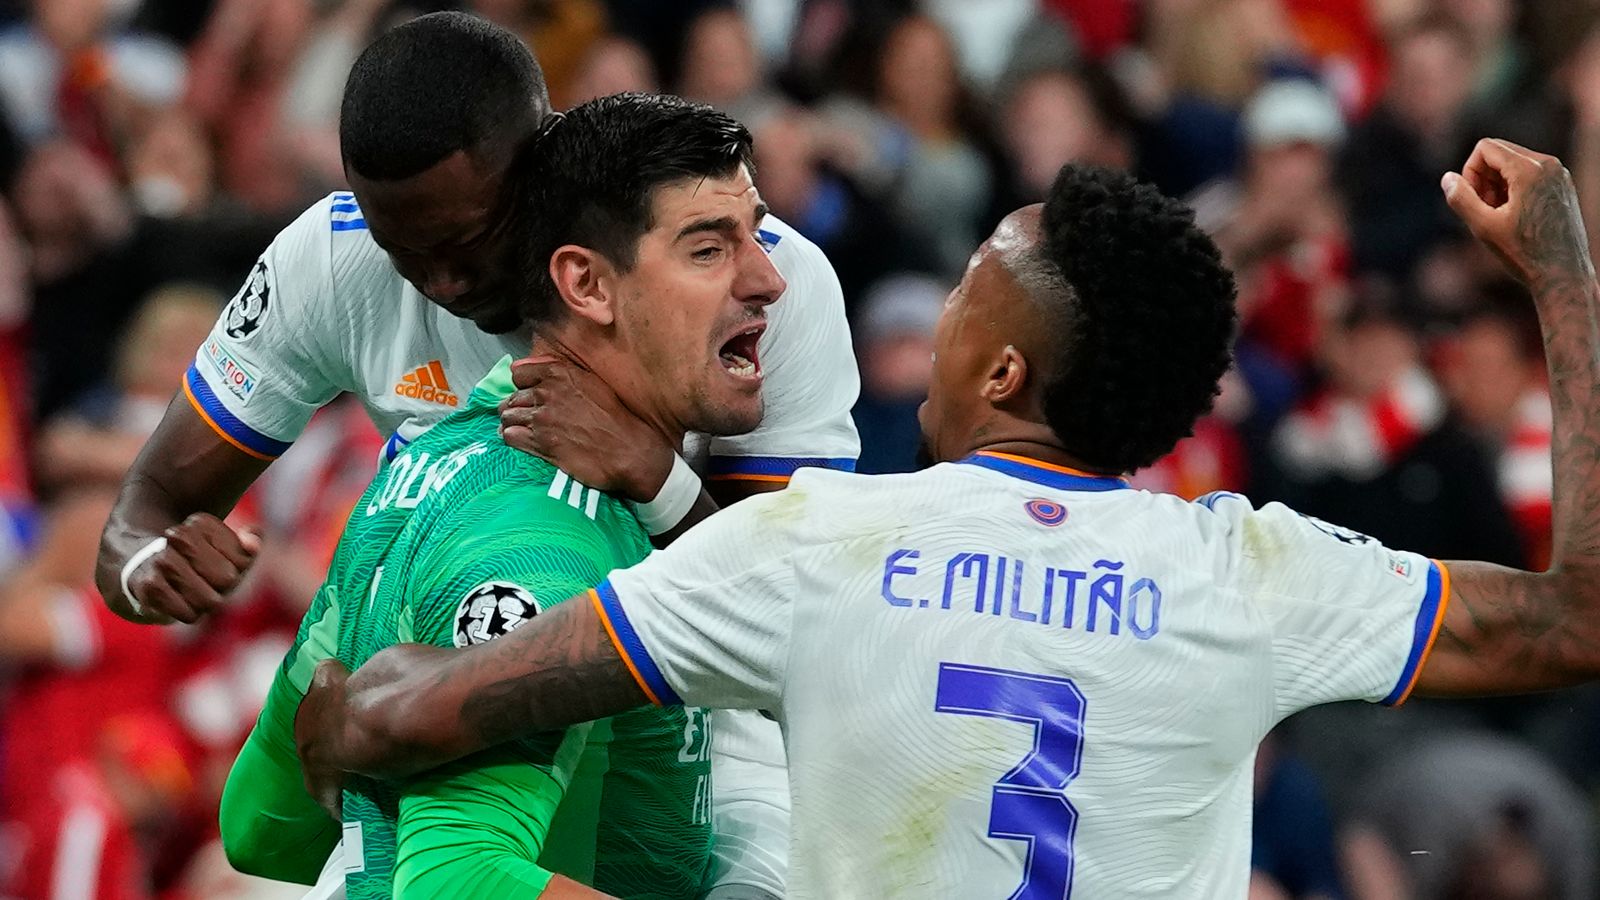 Liverpool 0-1 Real Madrid: Thibaut Courtois and Vinicius Jnr star as Mohamed Salah and Sadio Mane lack decisive touch